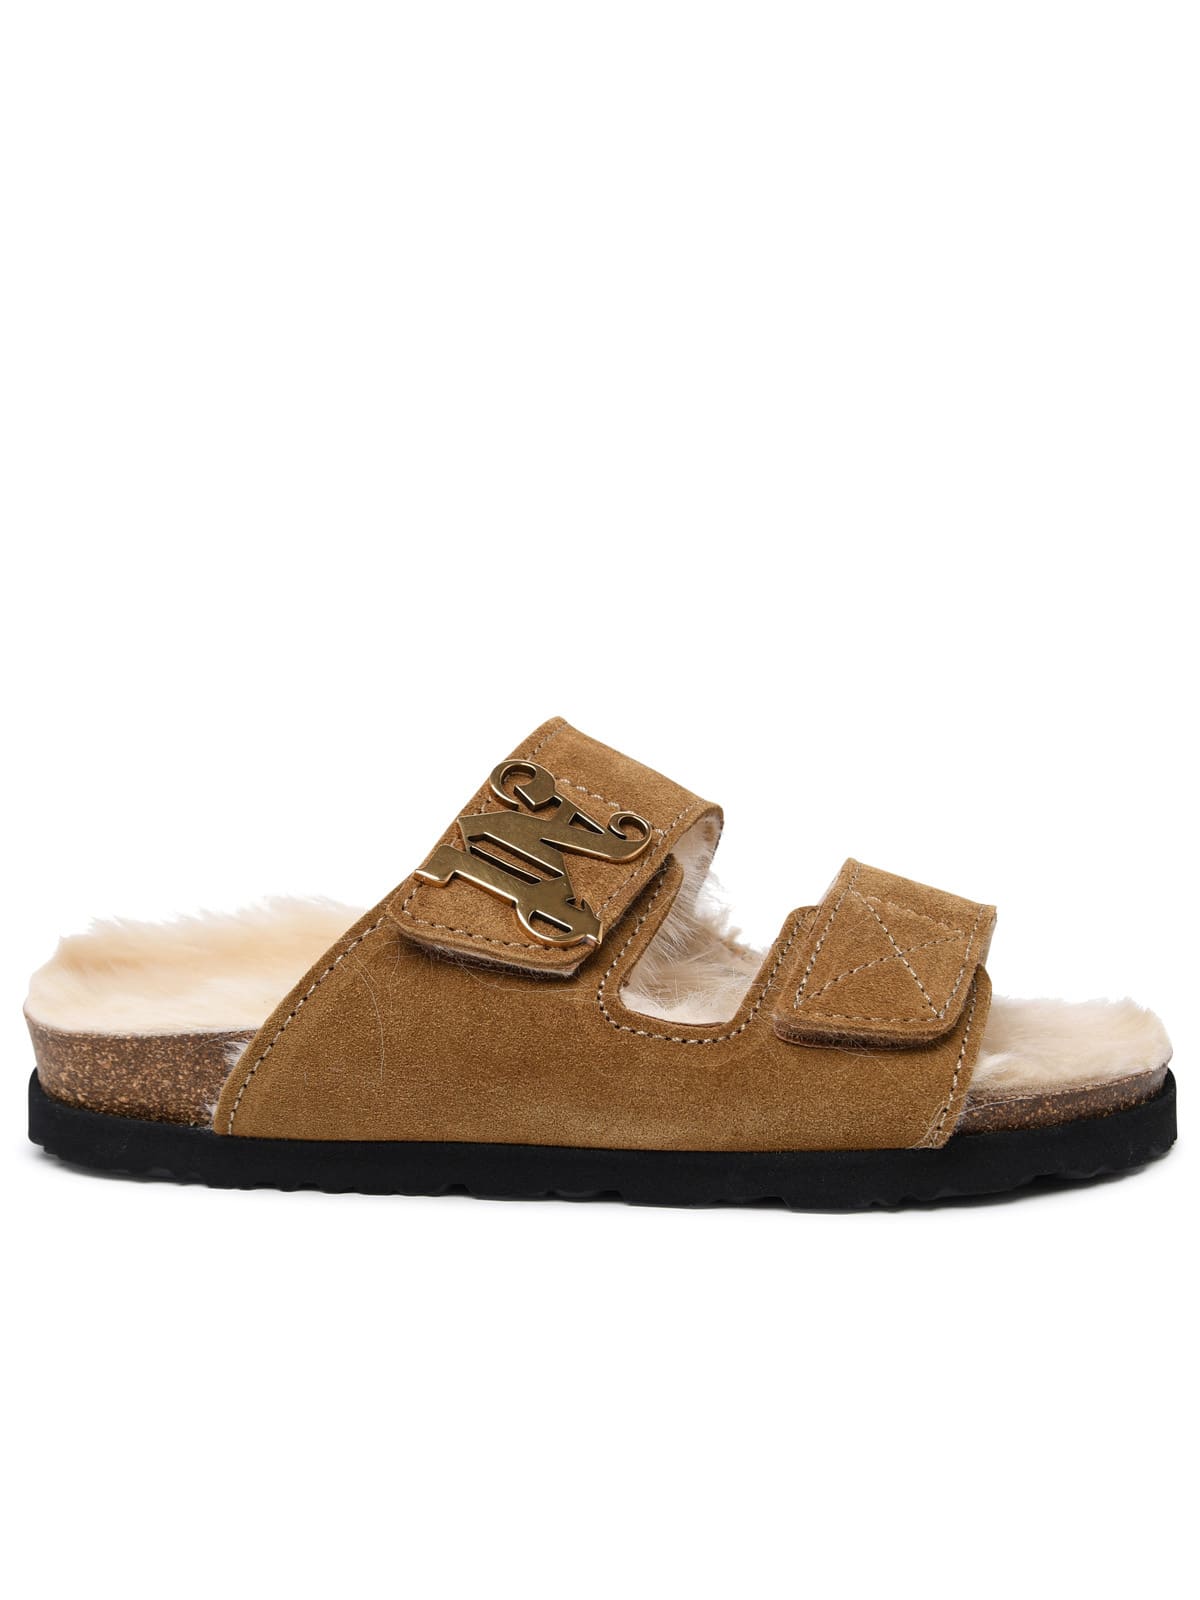 comfy Slippers In Beige Suede